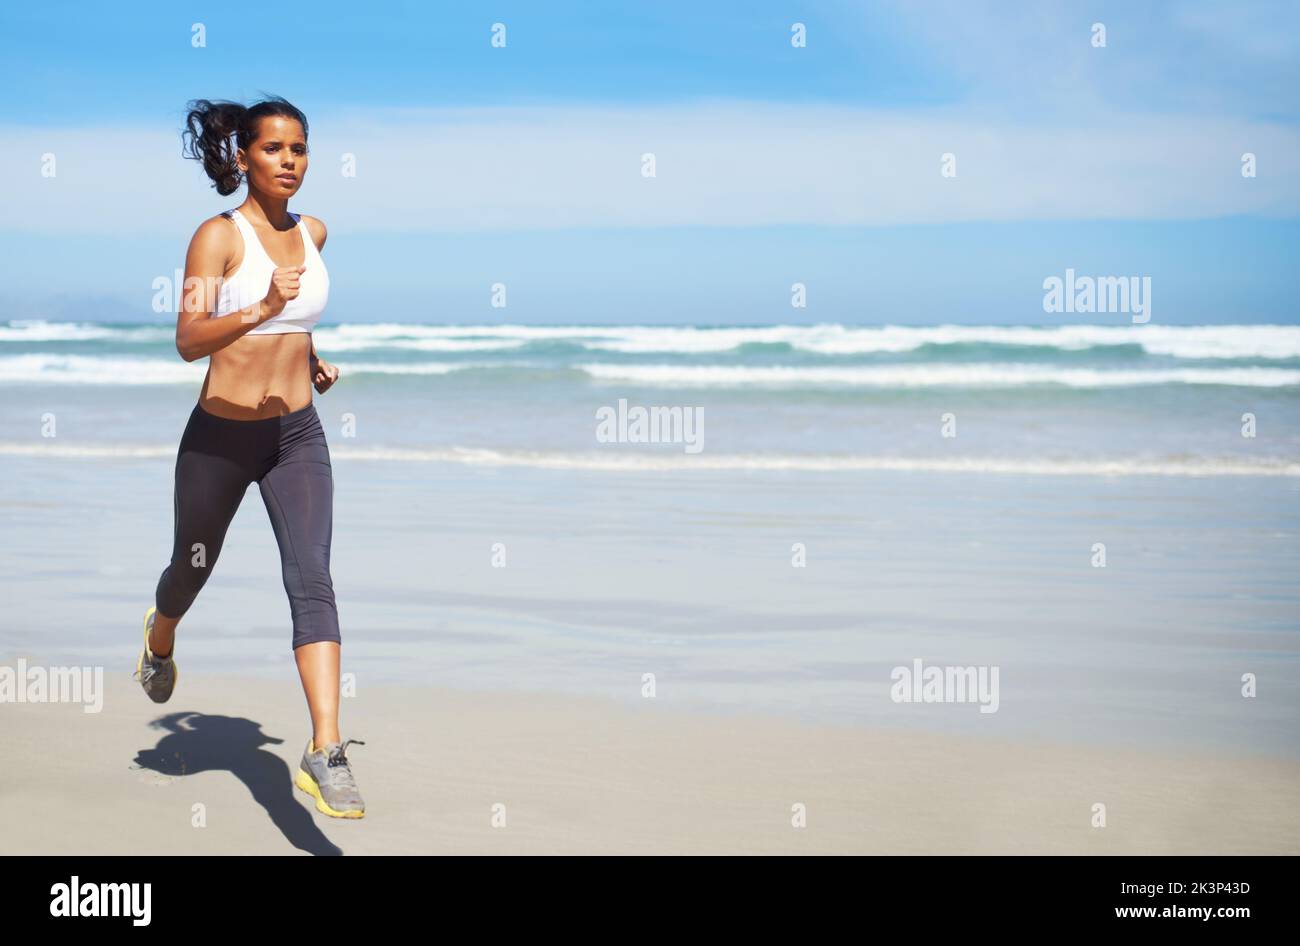 Mid-morning jog to clear her head. Full length shot of a young woman running along the seashore. Stock Photo